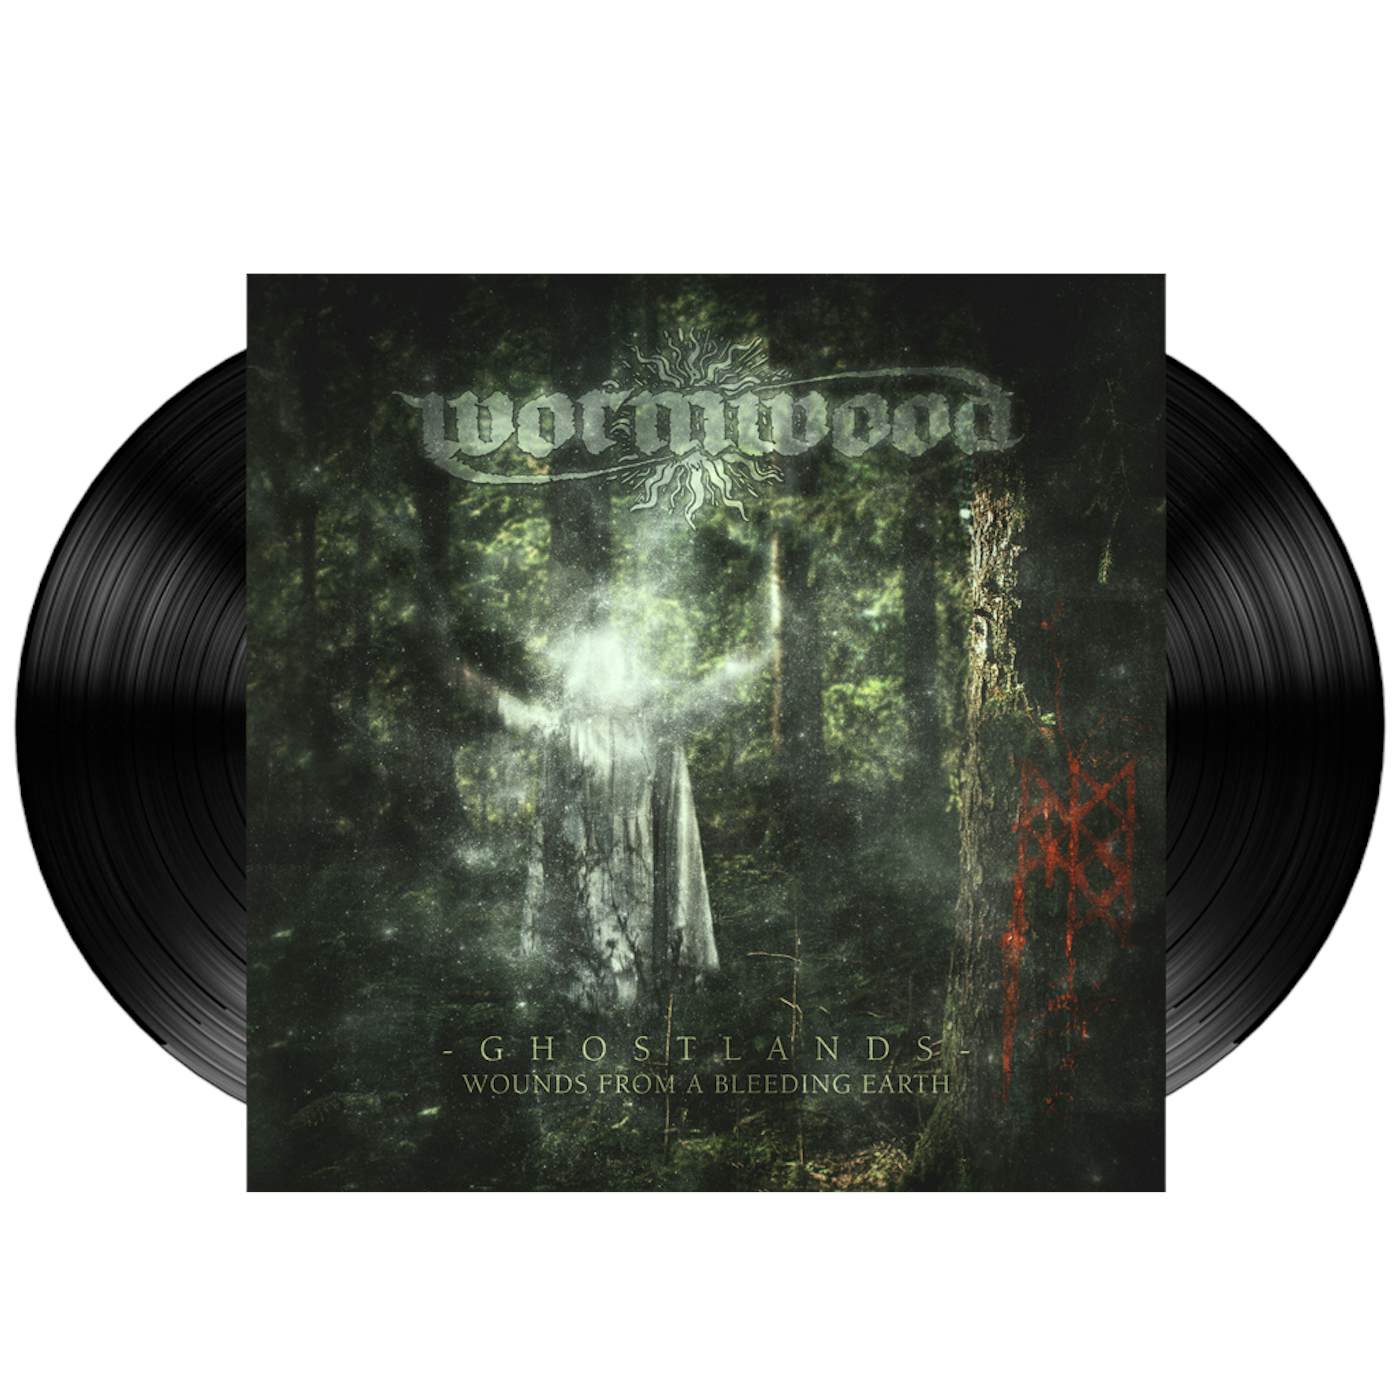 Wormwood - Ghostlands, wounds from a bleeding earth (2LP)